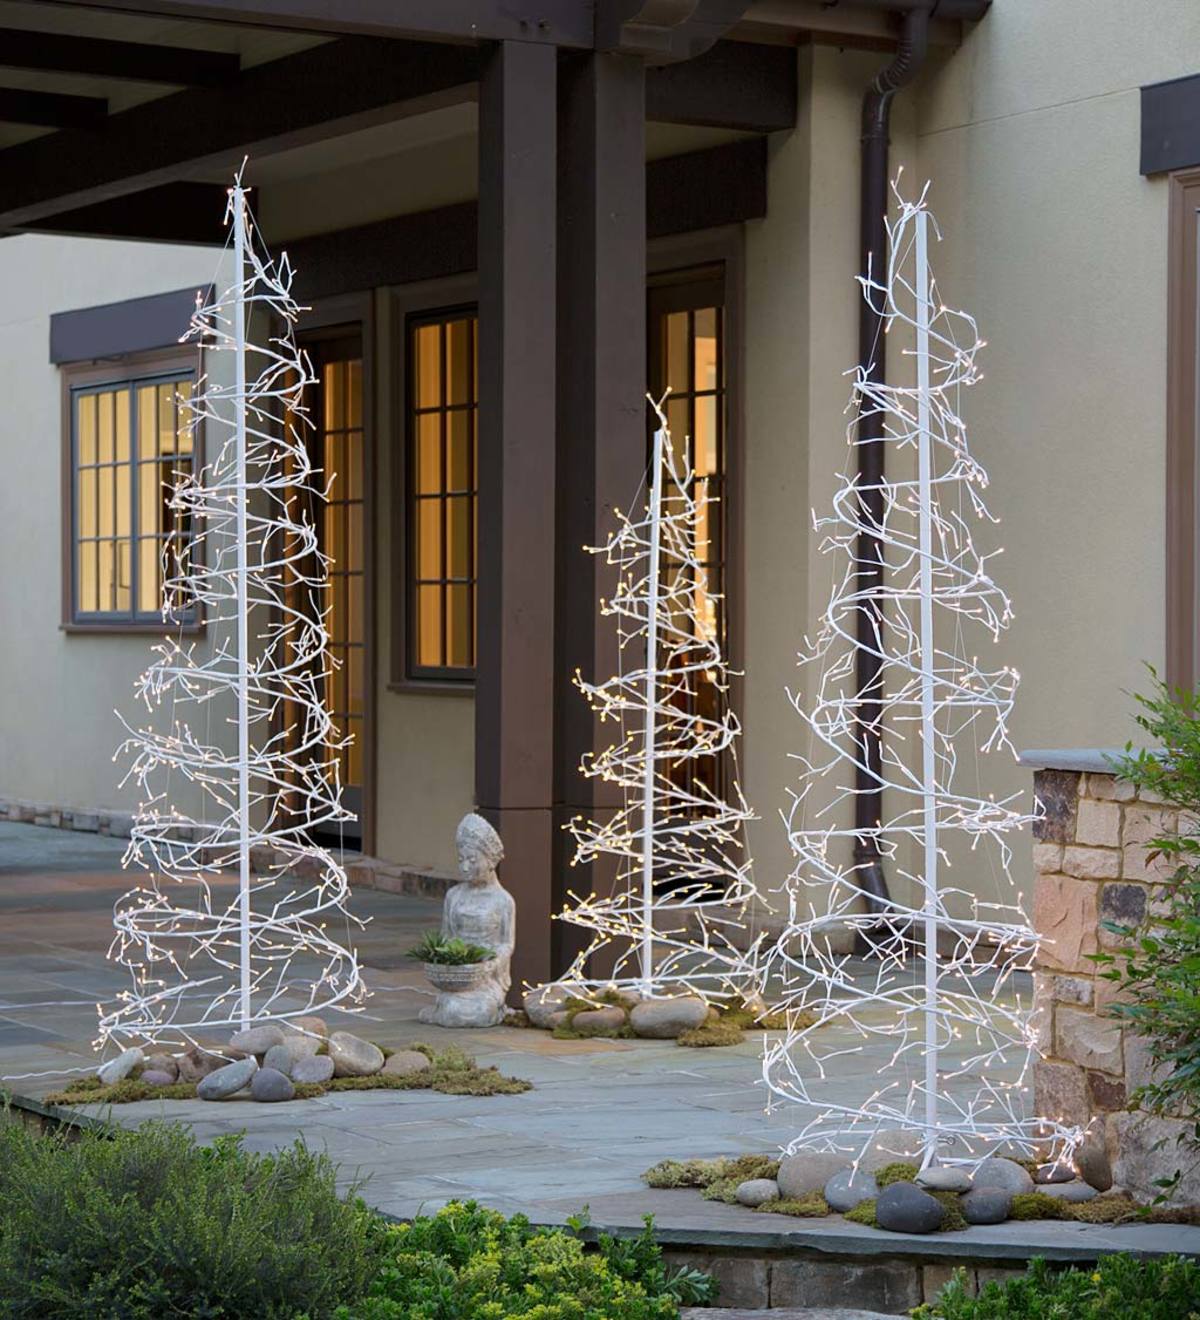 Collapsible Swirled LED Trees